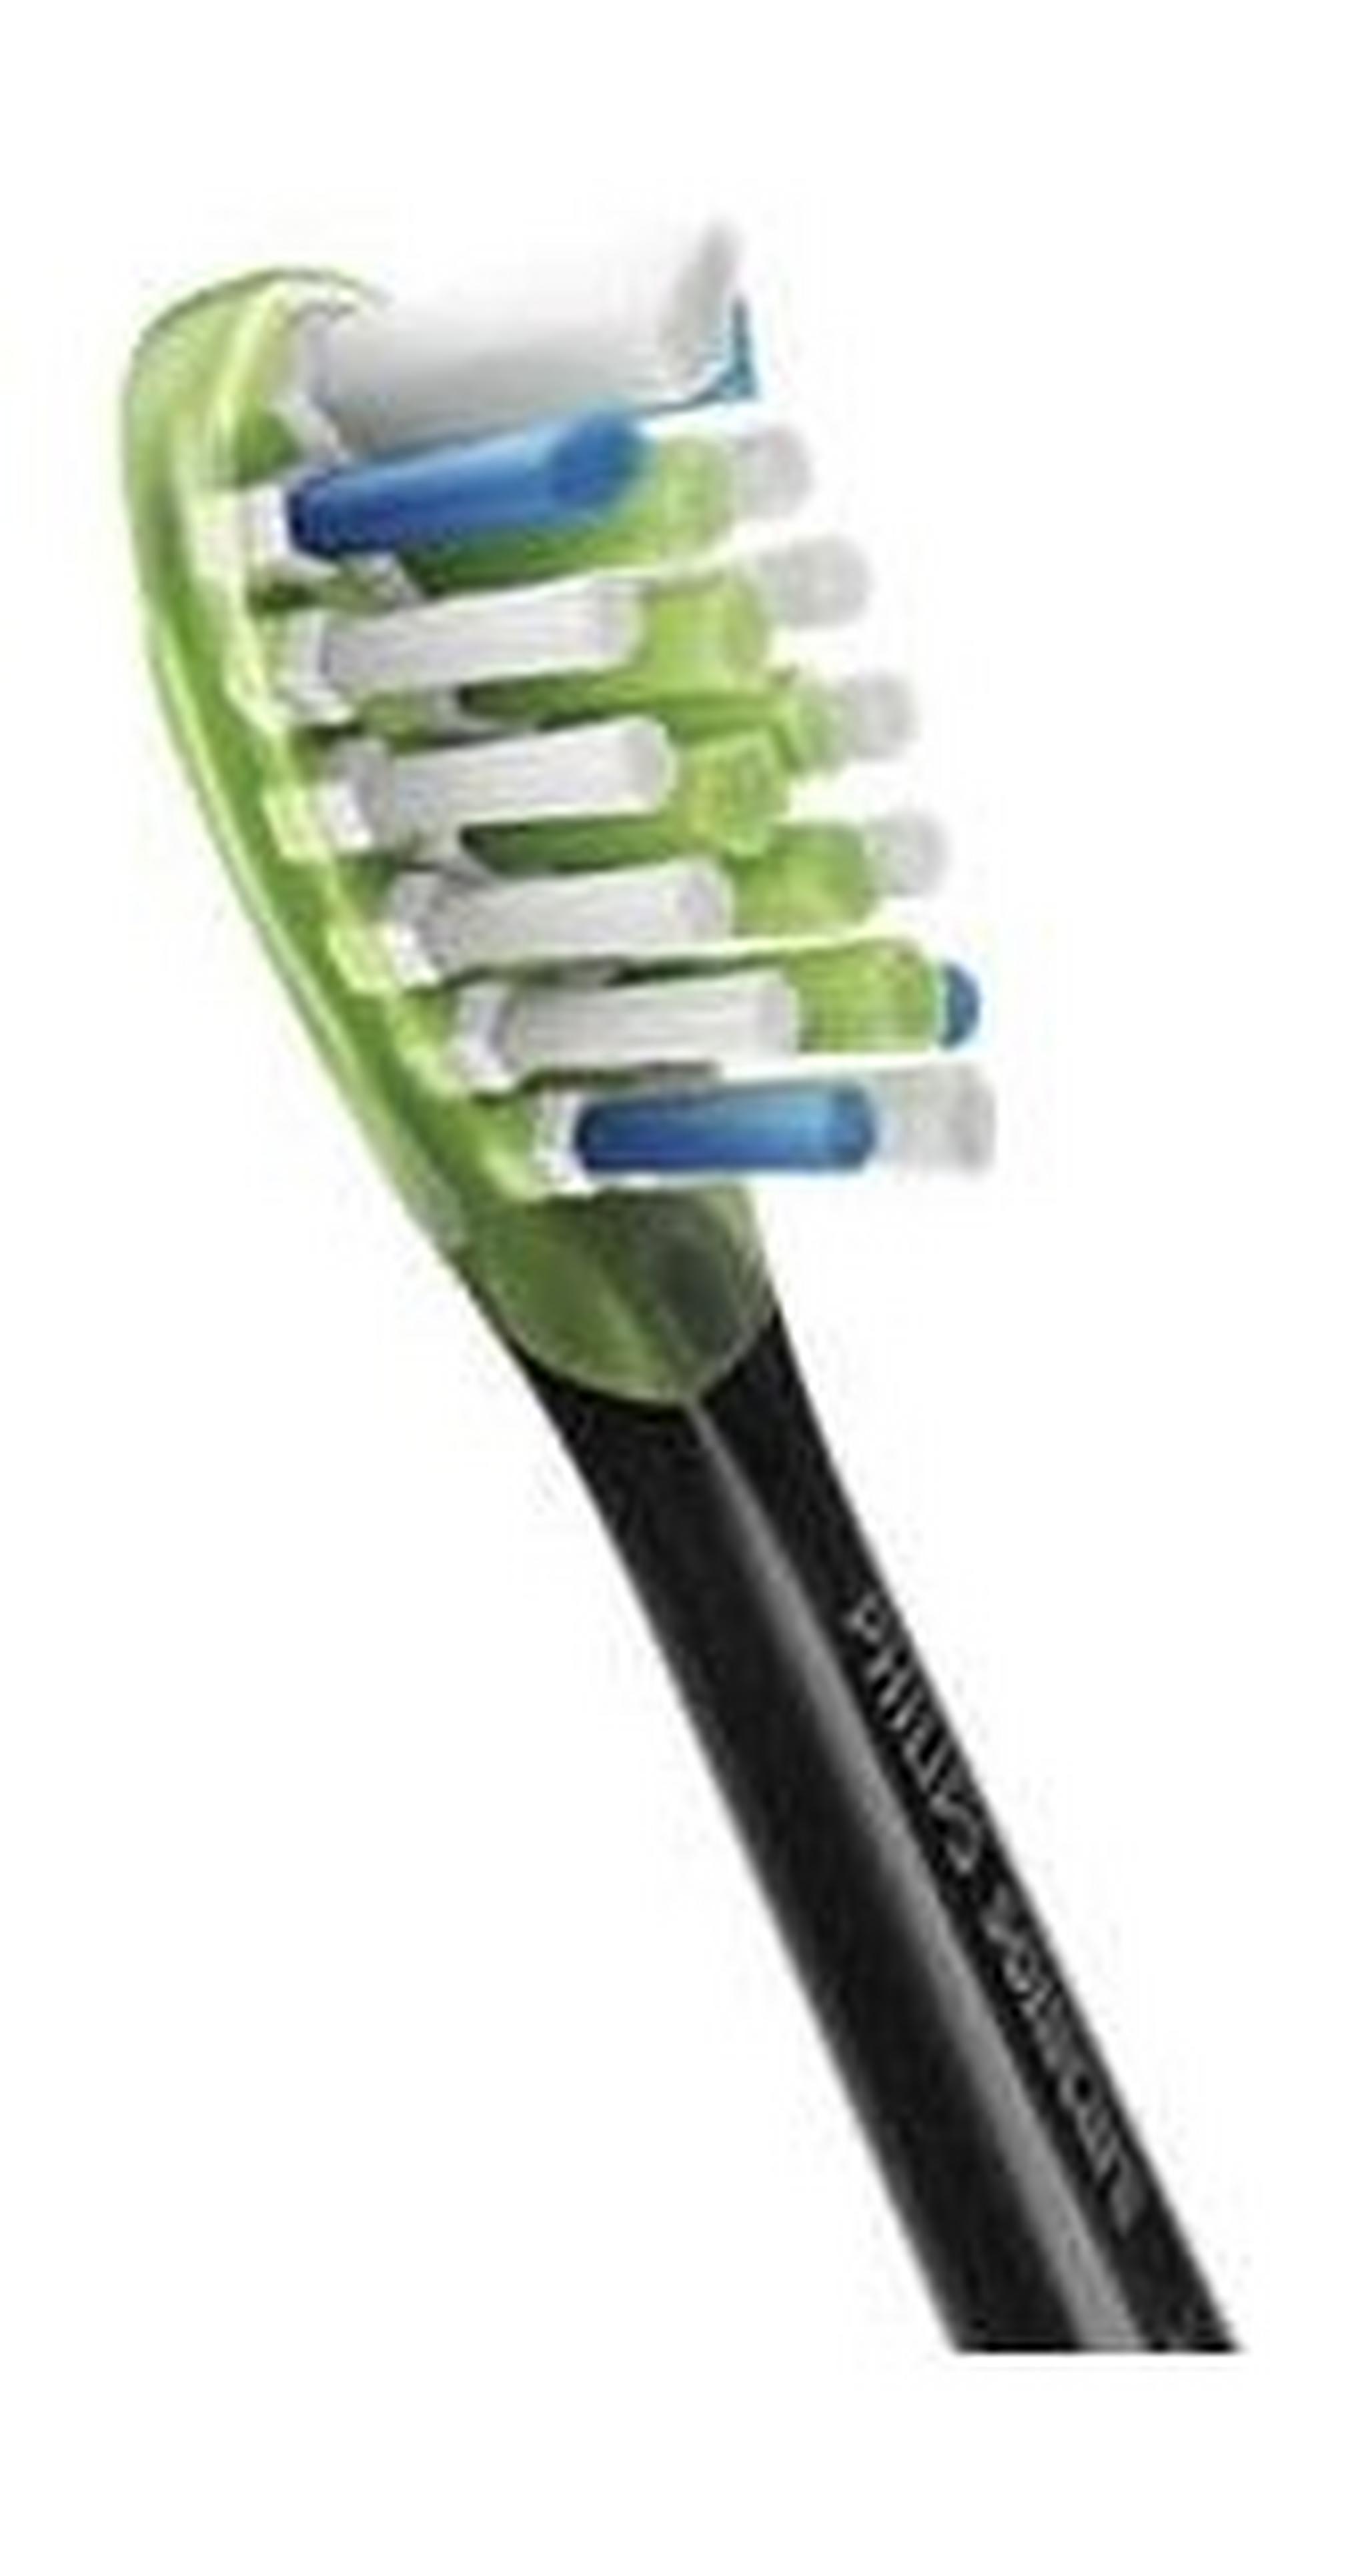 Philips Sonicare W3 Standard Sonic Toothbrush Heads